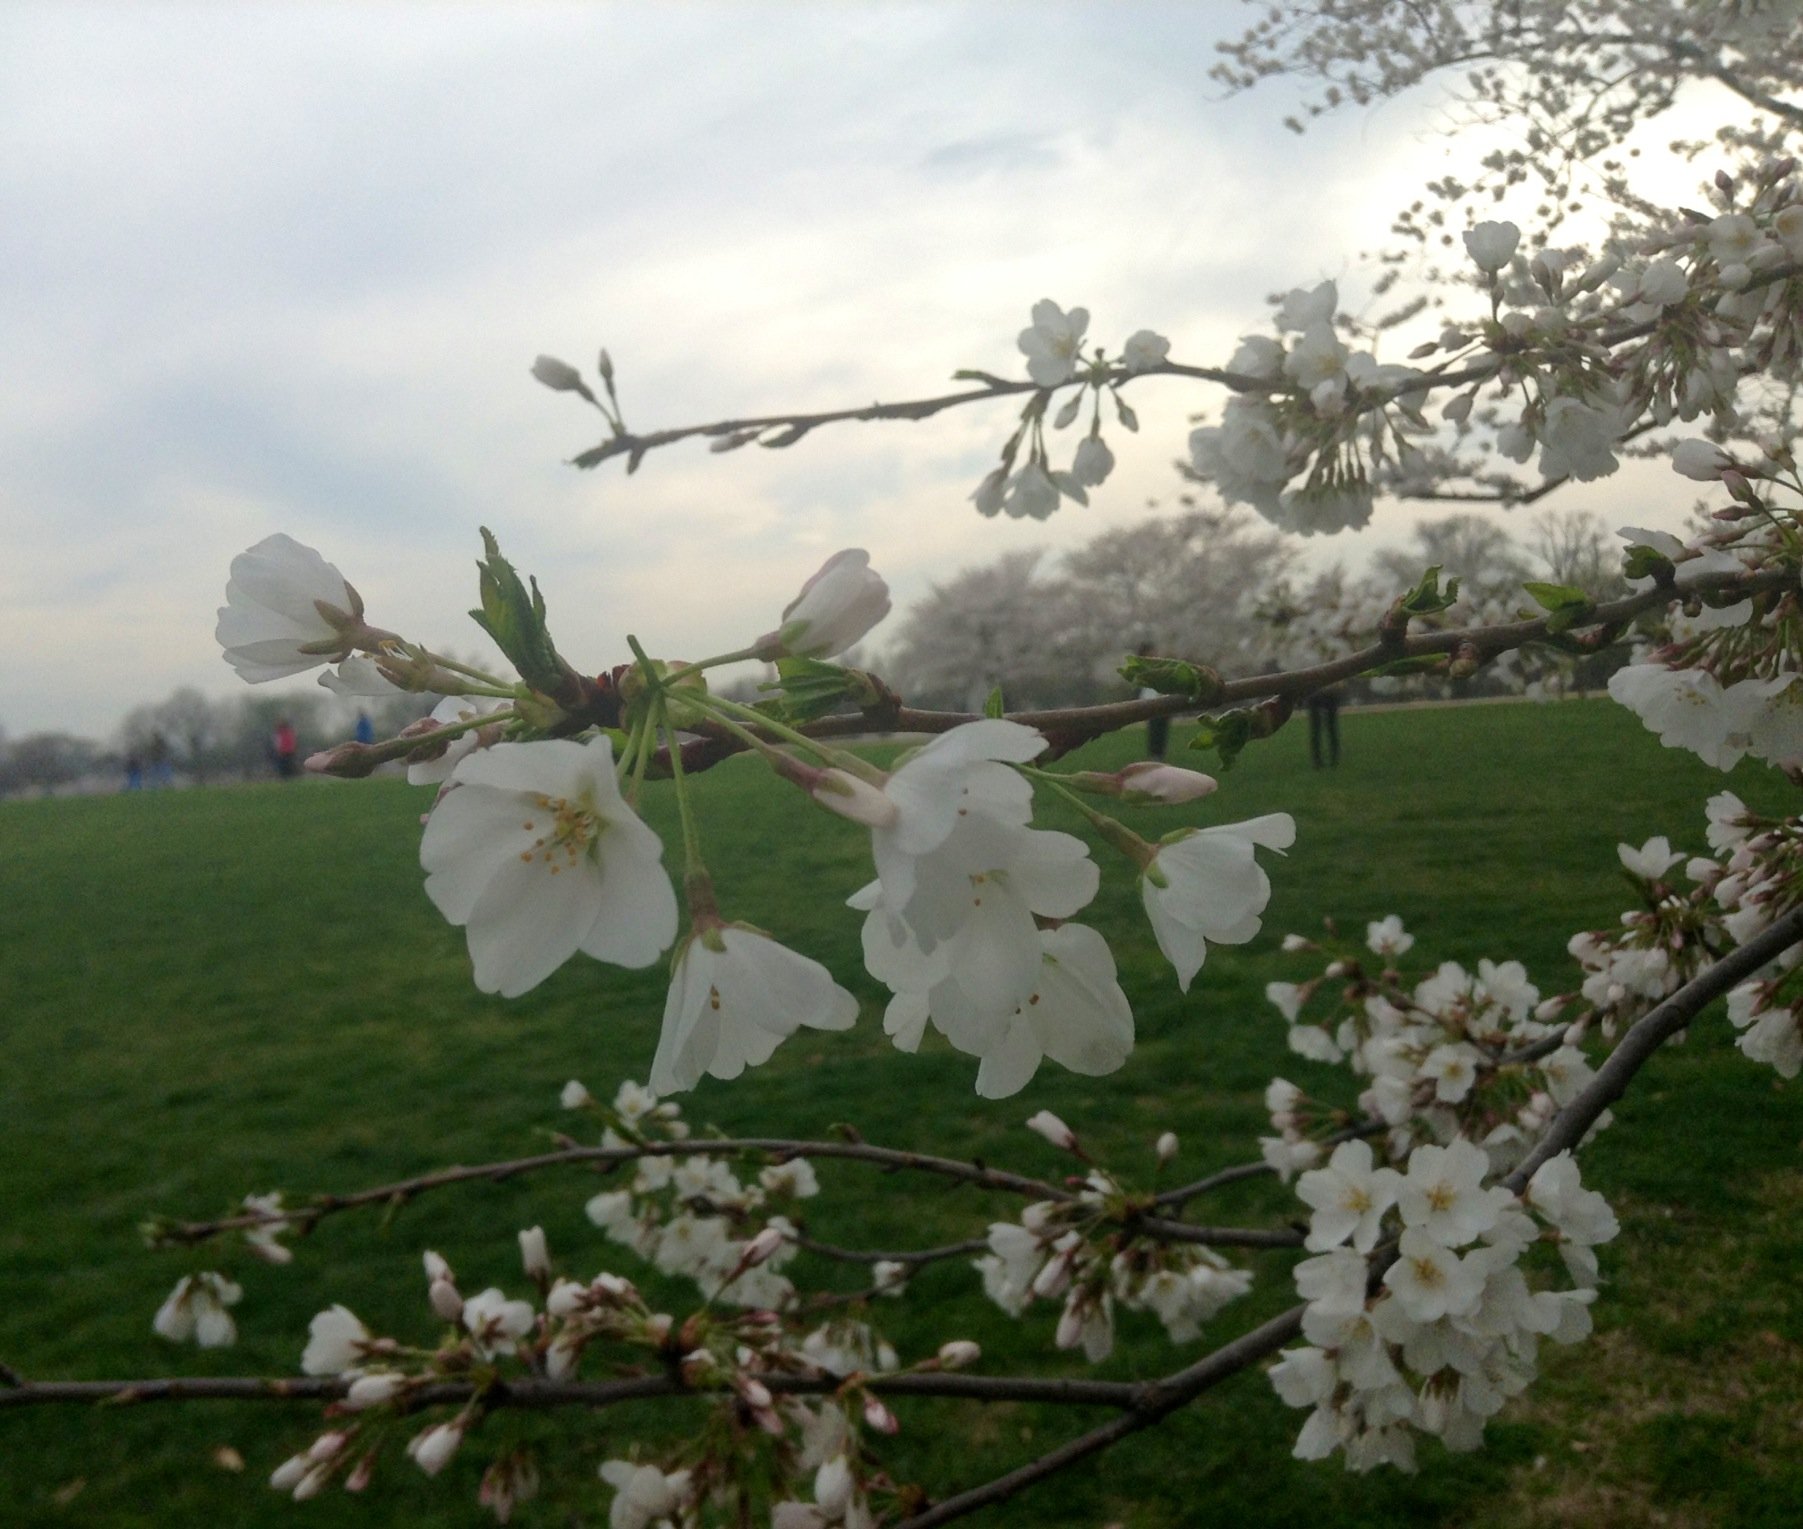 "I snapped photos of the cherry blossoms with the iPod delighting in their color and beauty, and was proud that I’d caught them before they were gone."
